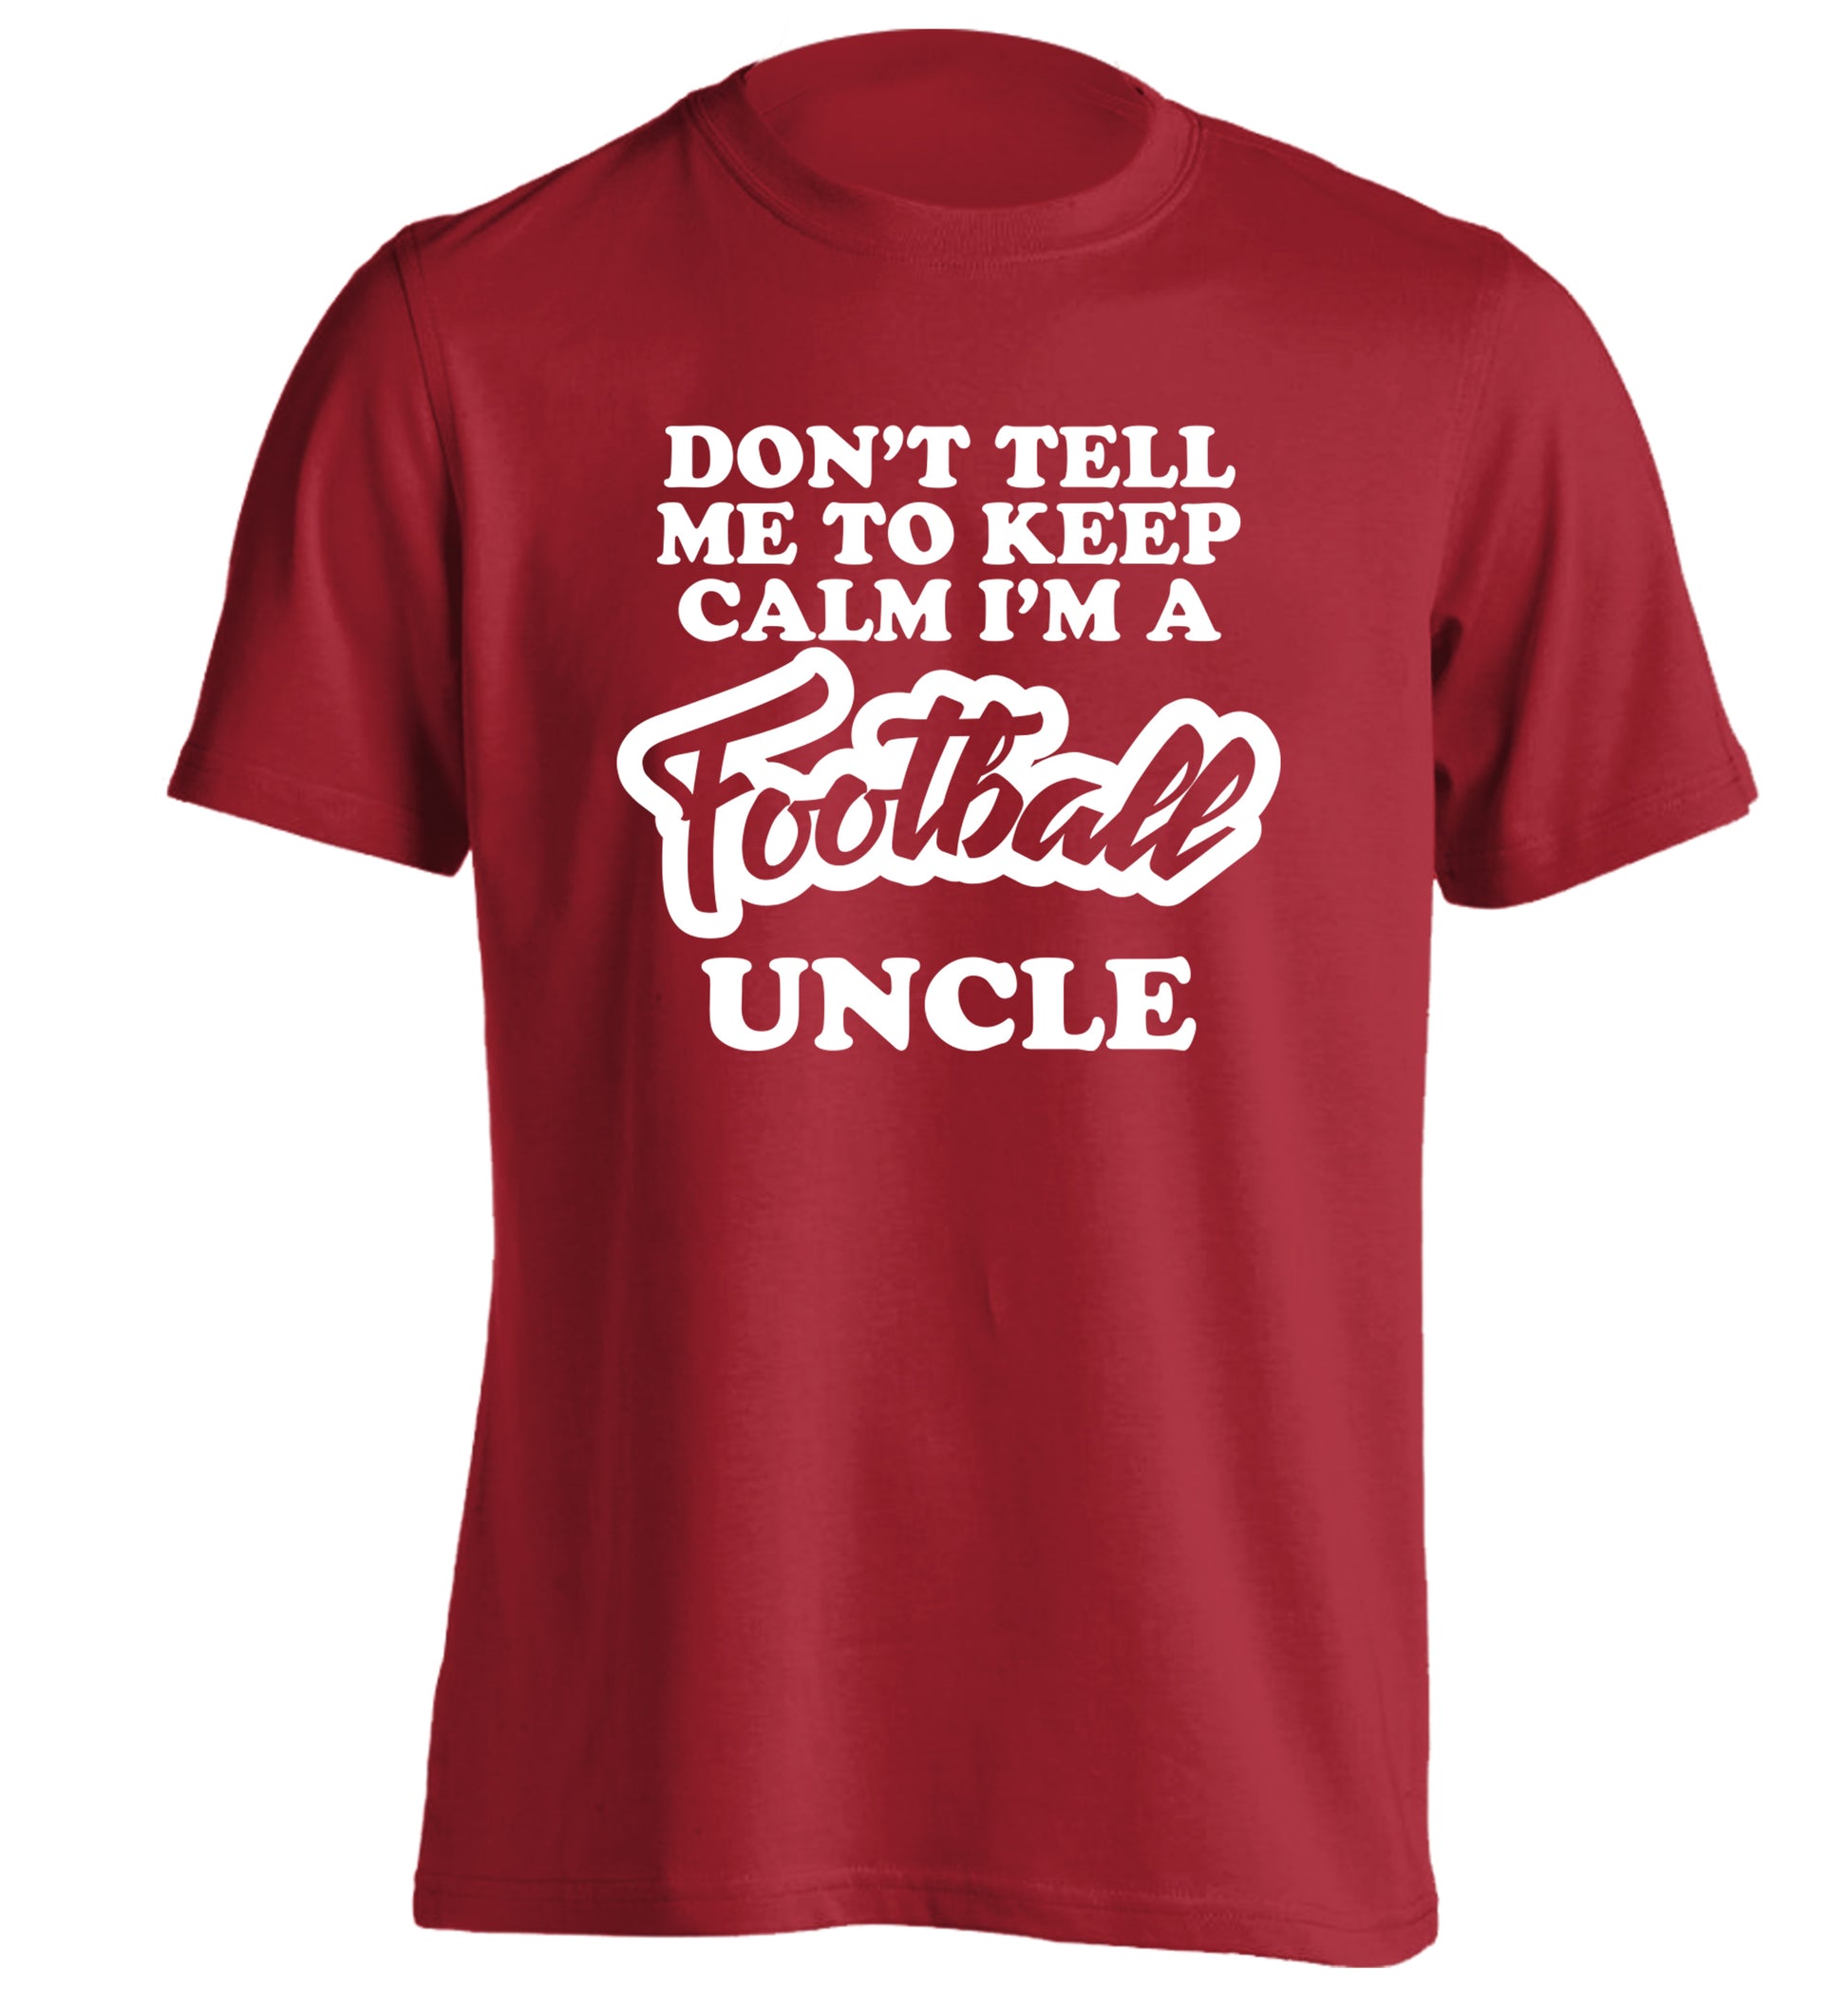 Worlds most amazing football uncle adults unisexred Tshirt 2XL